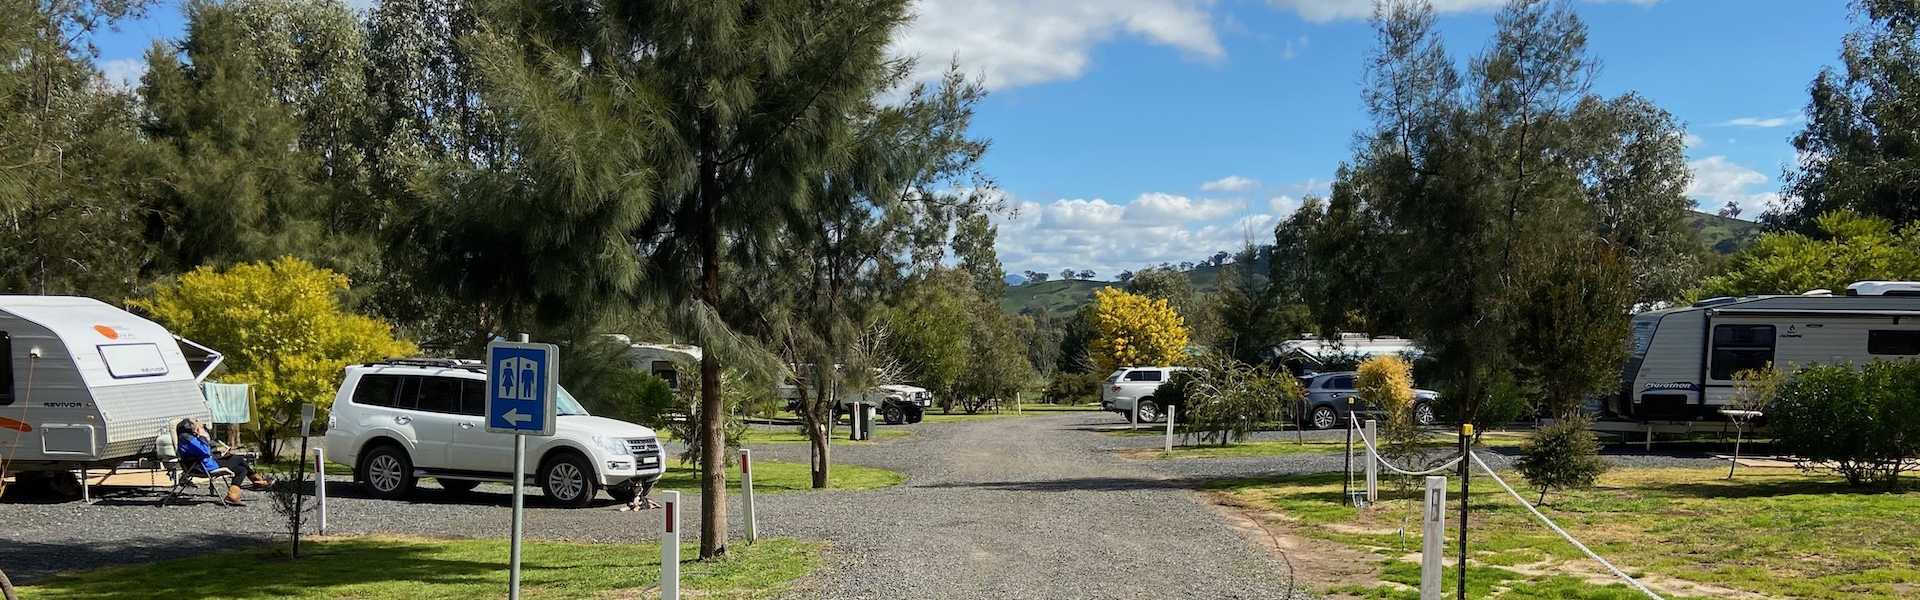 Kui Parks, Coolac Cabins & Camping